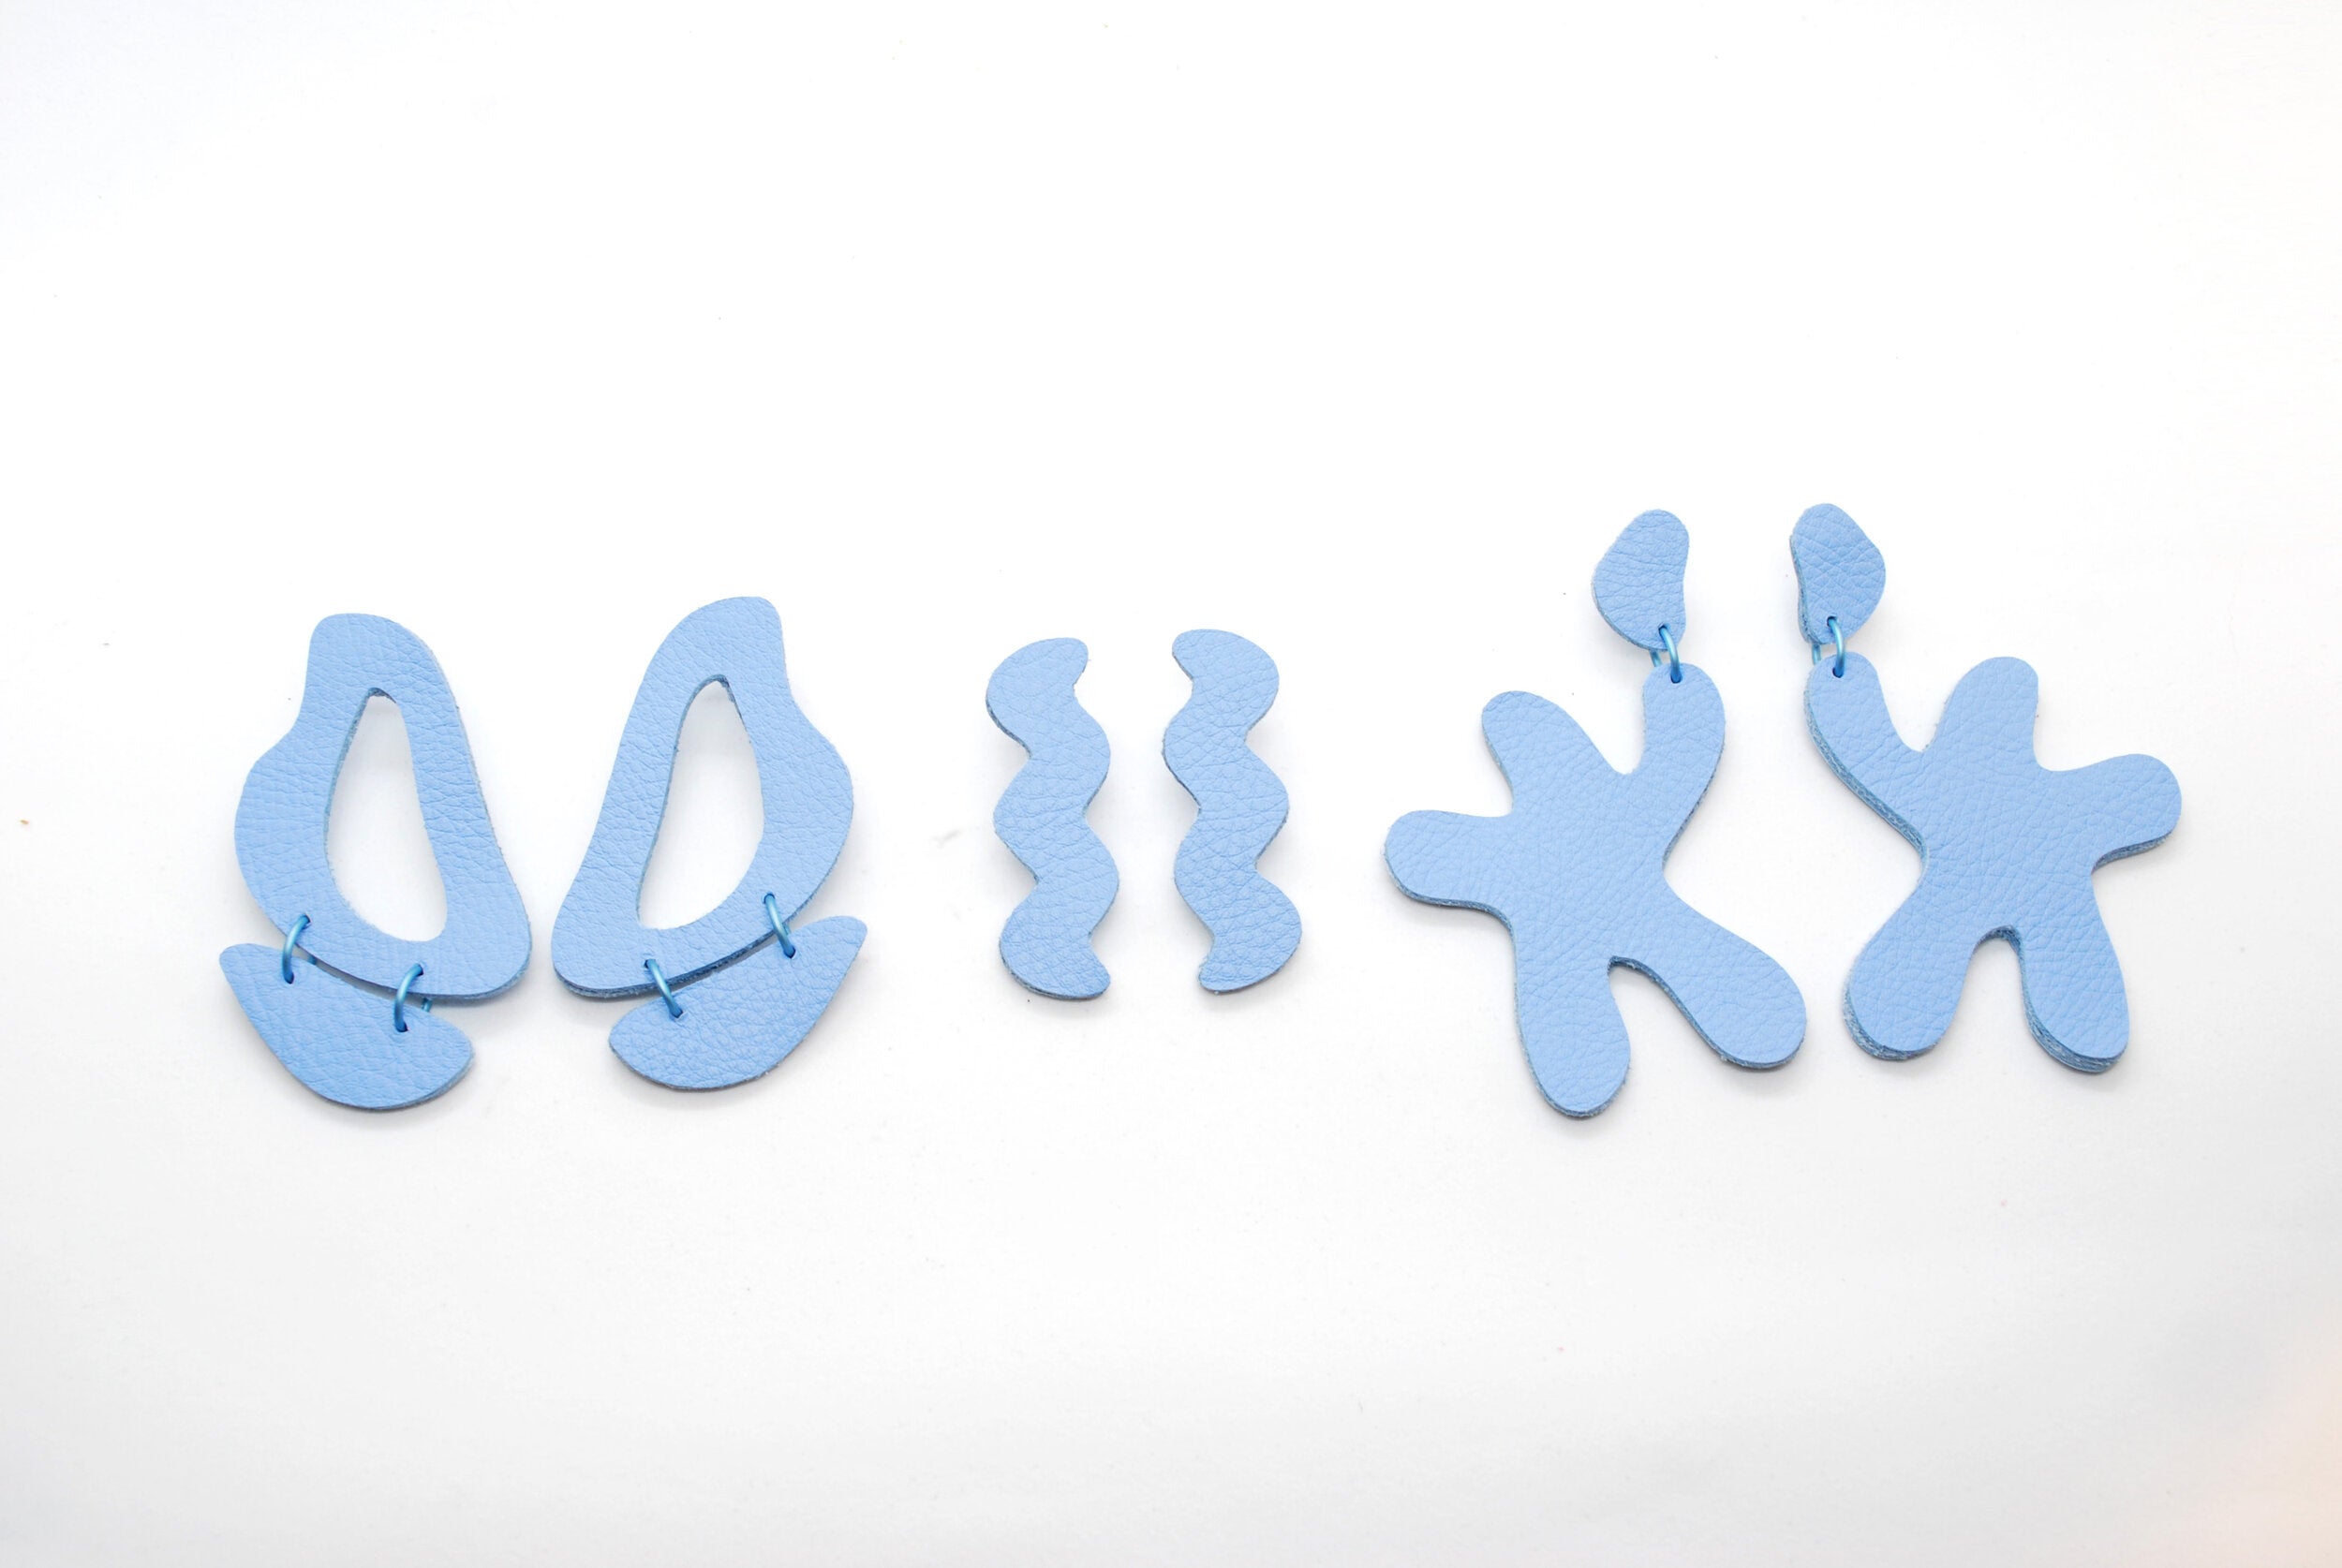 three pairs of irregular shape oversized statement earrings in baby blue.